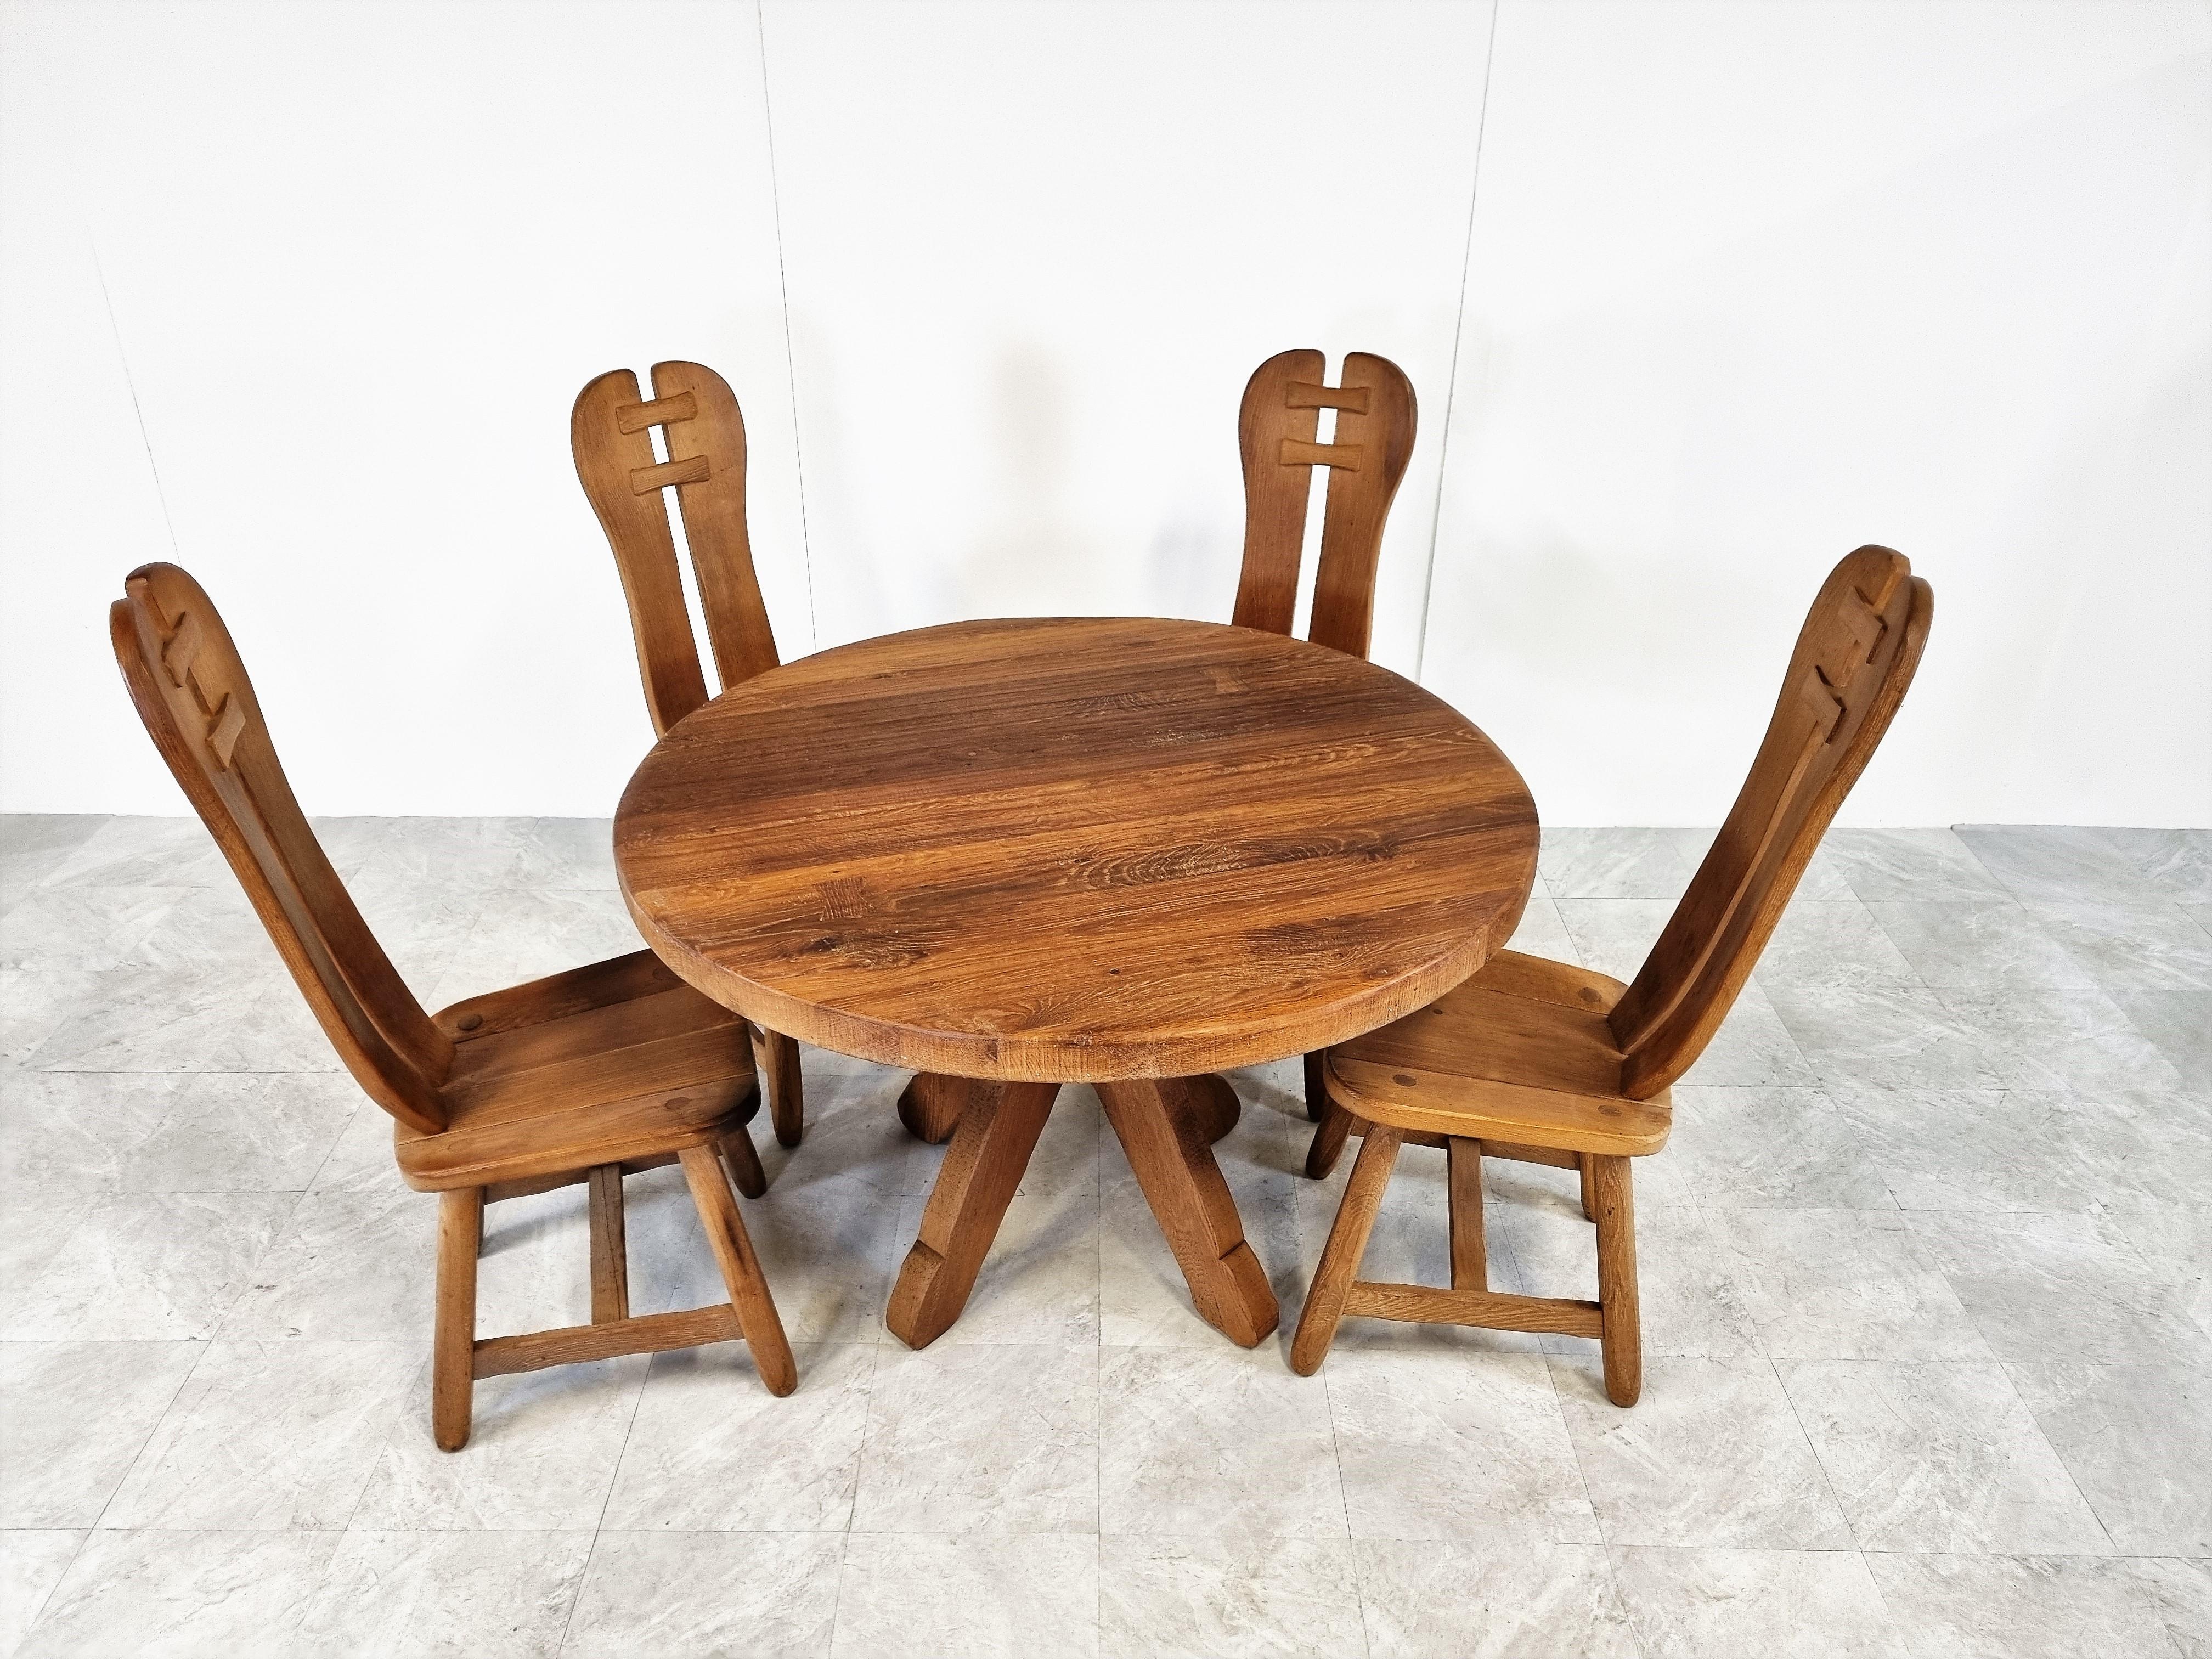 Sturdy and handcrafted dining chairs with matching table produced by Depuydt Kunstmeubelen in Belgium.

The entire set is made out of solid oak.

It's rare to have the chairs and table.

Beautiful split backs with interlocking wooden